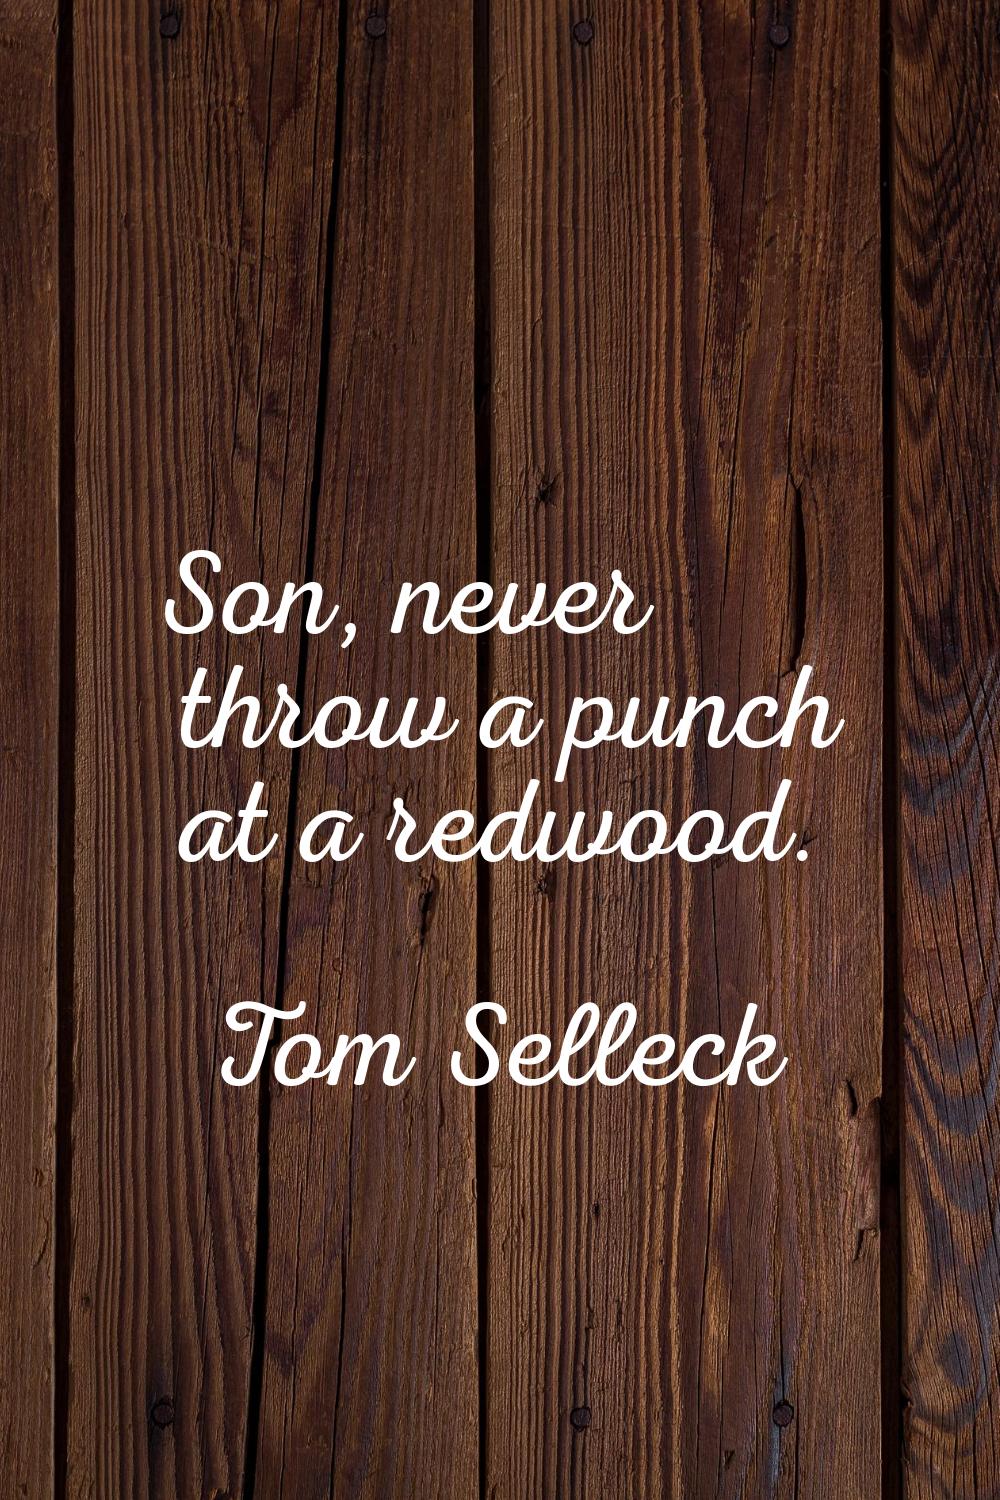 Son, never throw a punch at a redwood.